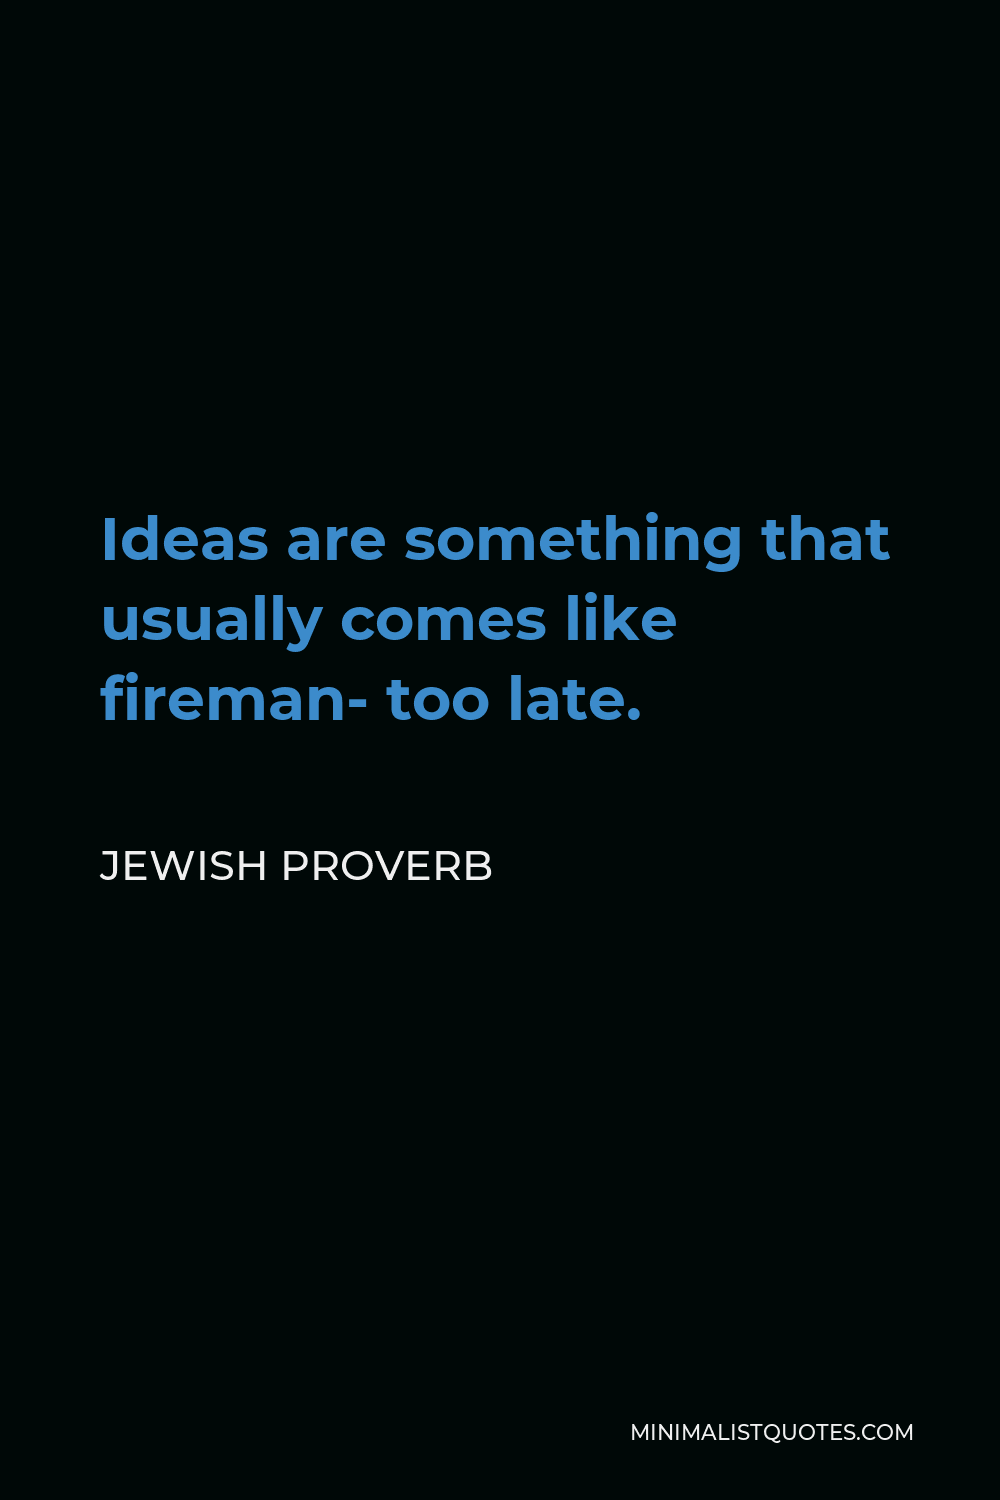 Jewish Proverb Quote - Ideas are something that usually comes like fireman- too late.